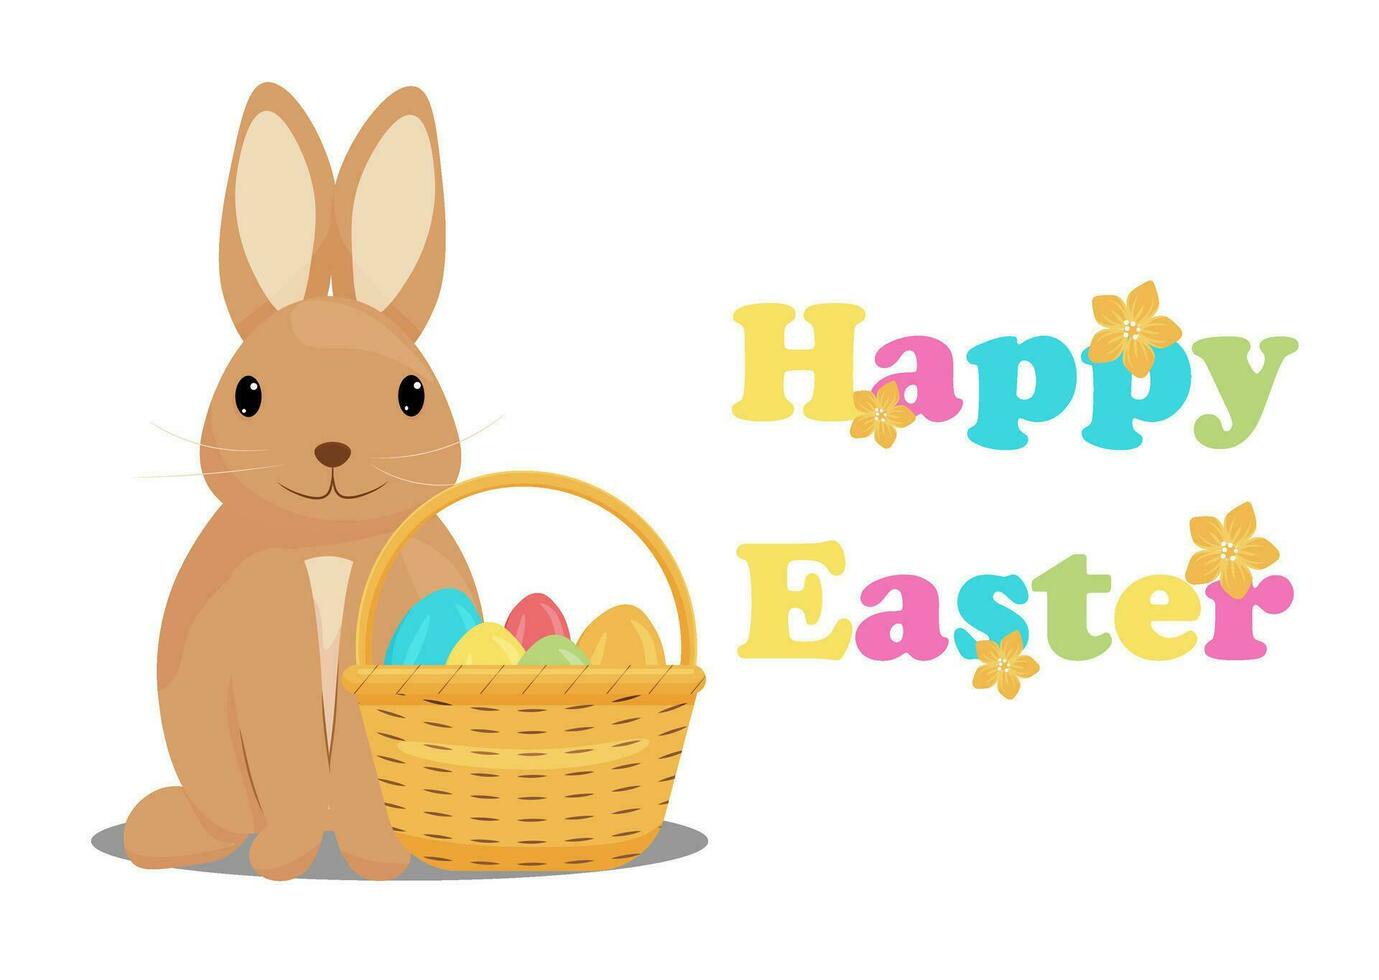 Cute cartoon Easter bunny with basket and eggs. Happy Easter text. Vector illustration